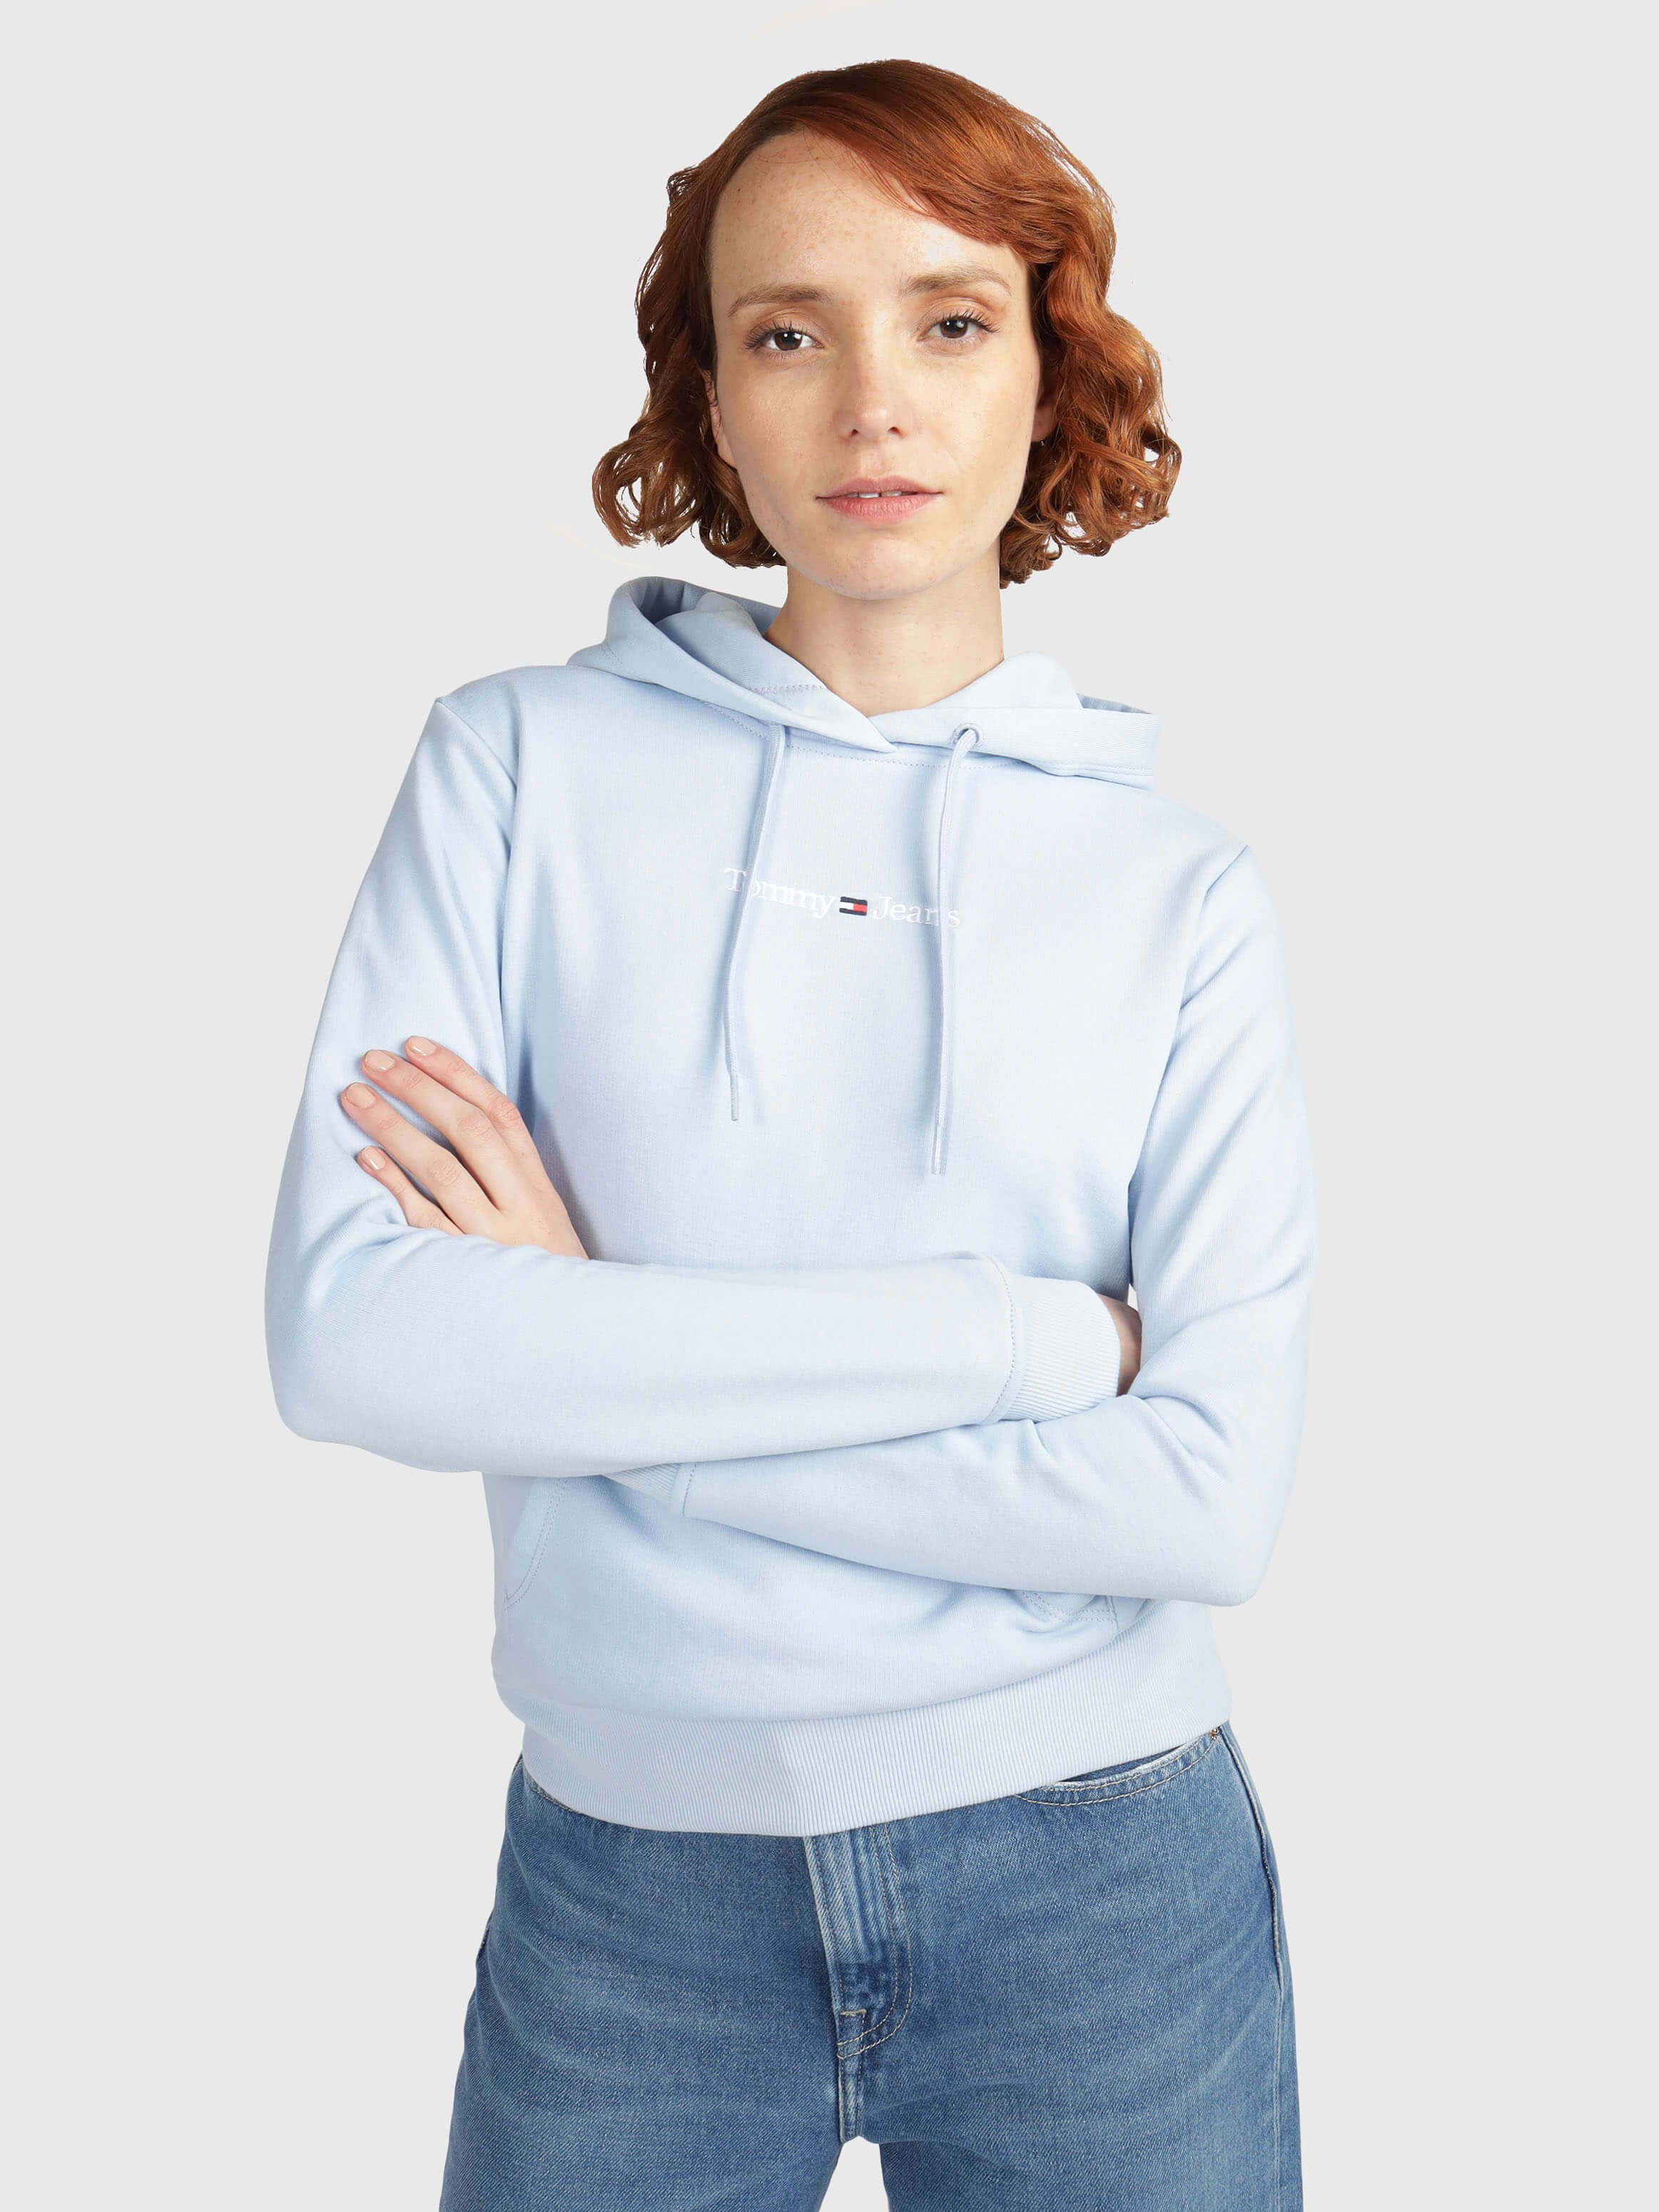 Ripley - SWEATER O HOODIE CON CAPUCHA TOMMY HILFIGER PARA MUJER - BLANCO